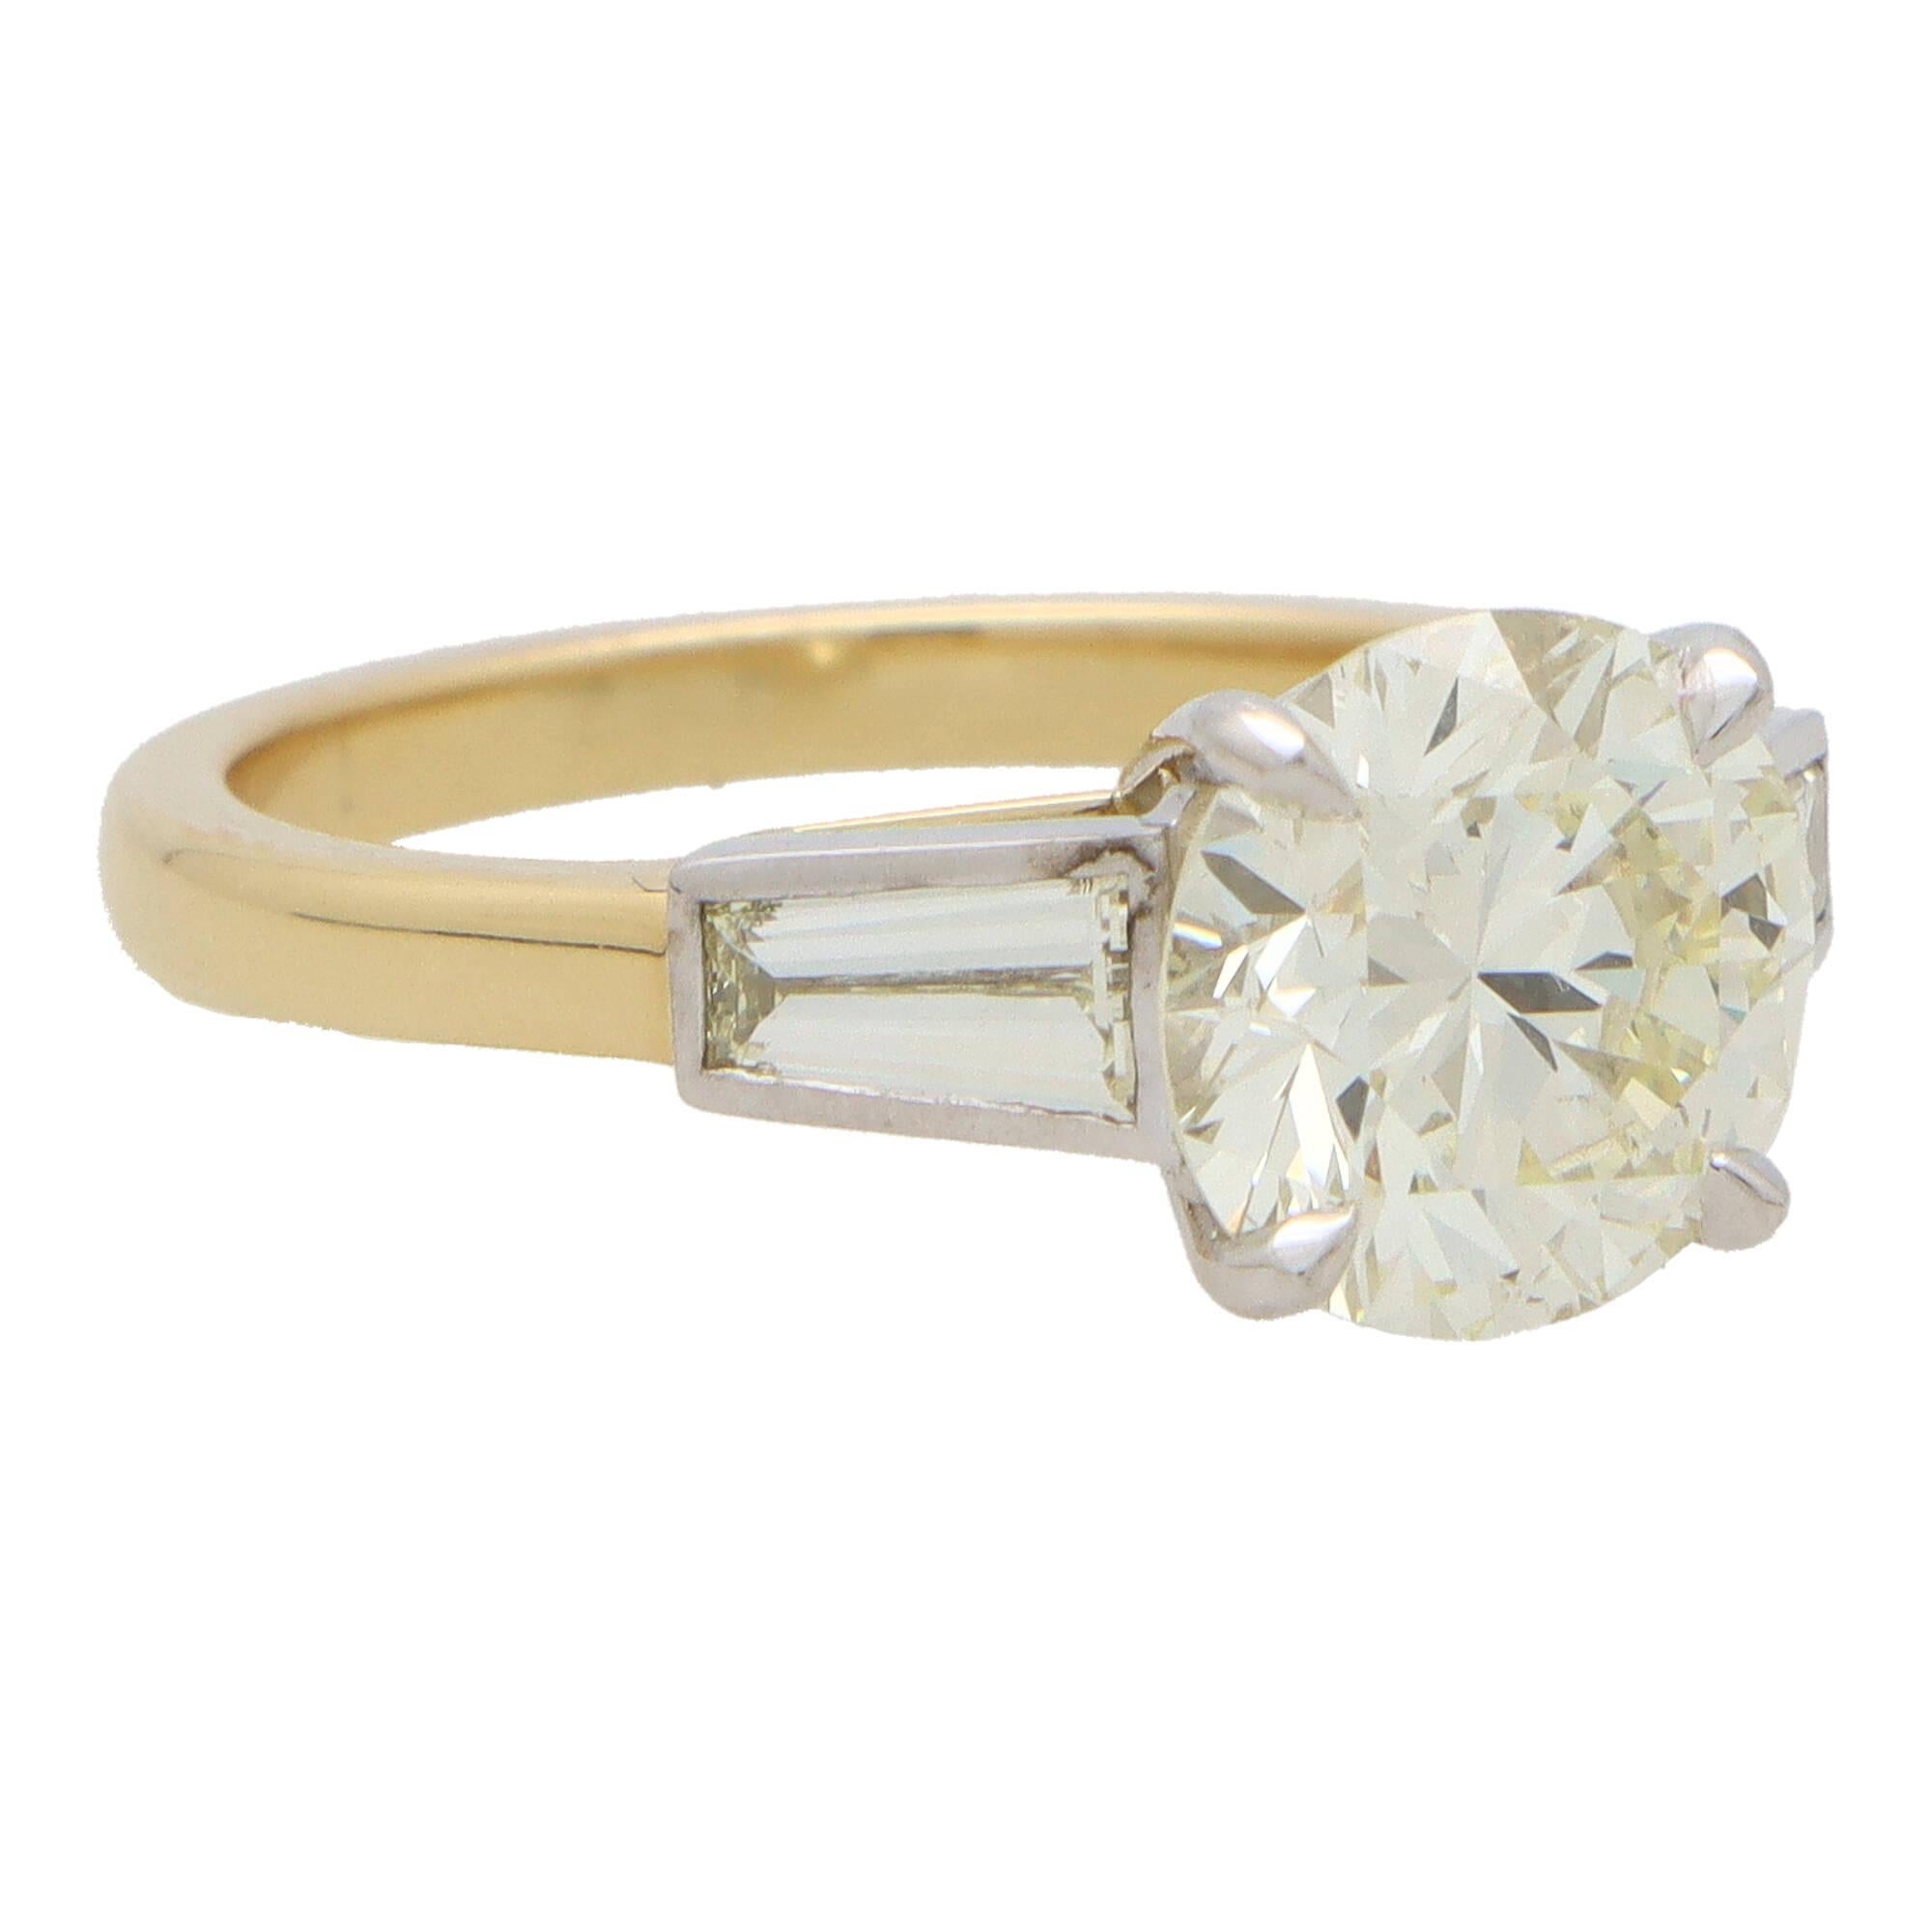 A beautiful certified vintage round brilliant cut diamond three stone ring set in 18k yellow gold and platinum.

The piece is centrally set with a sparkly 2.56 carat round brilliant cut diamond which is securely 4 claw set. To either side of the